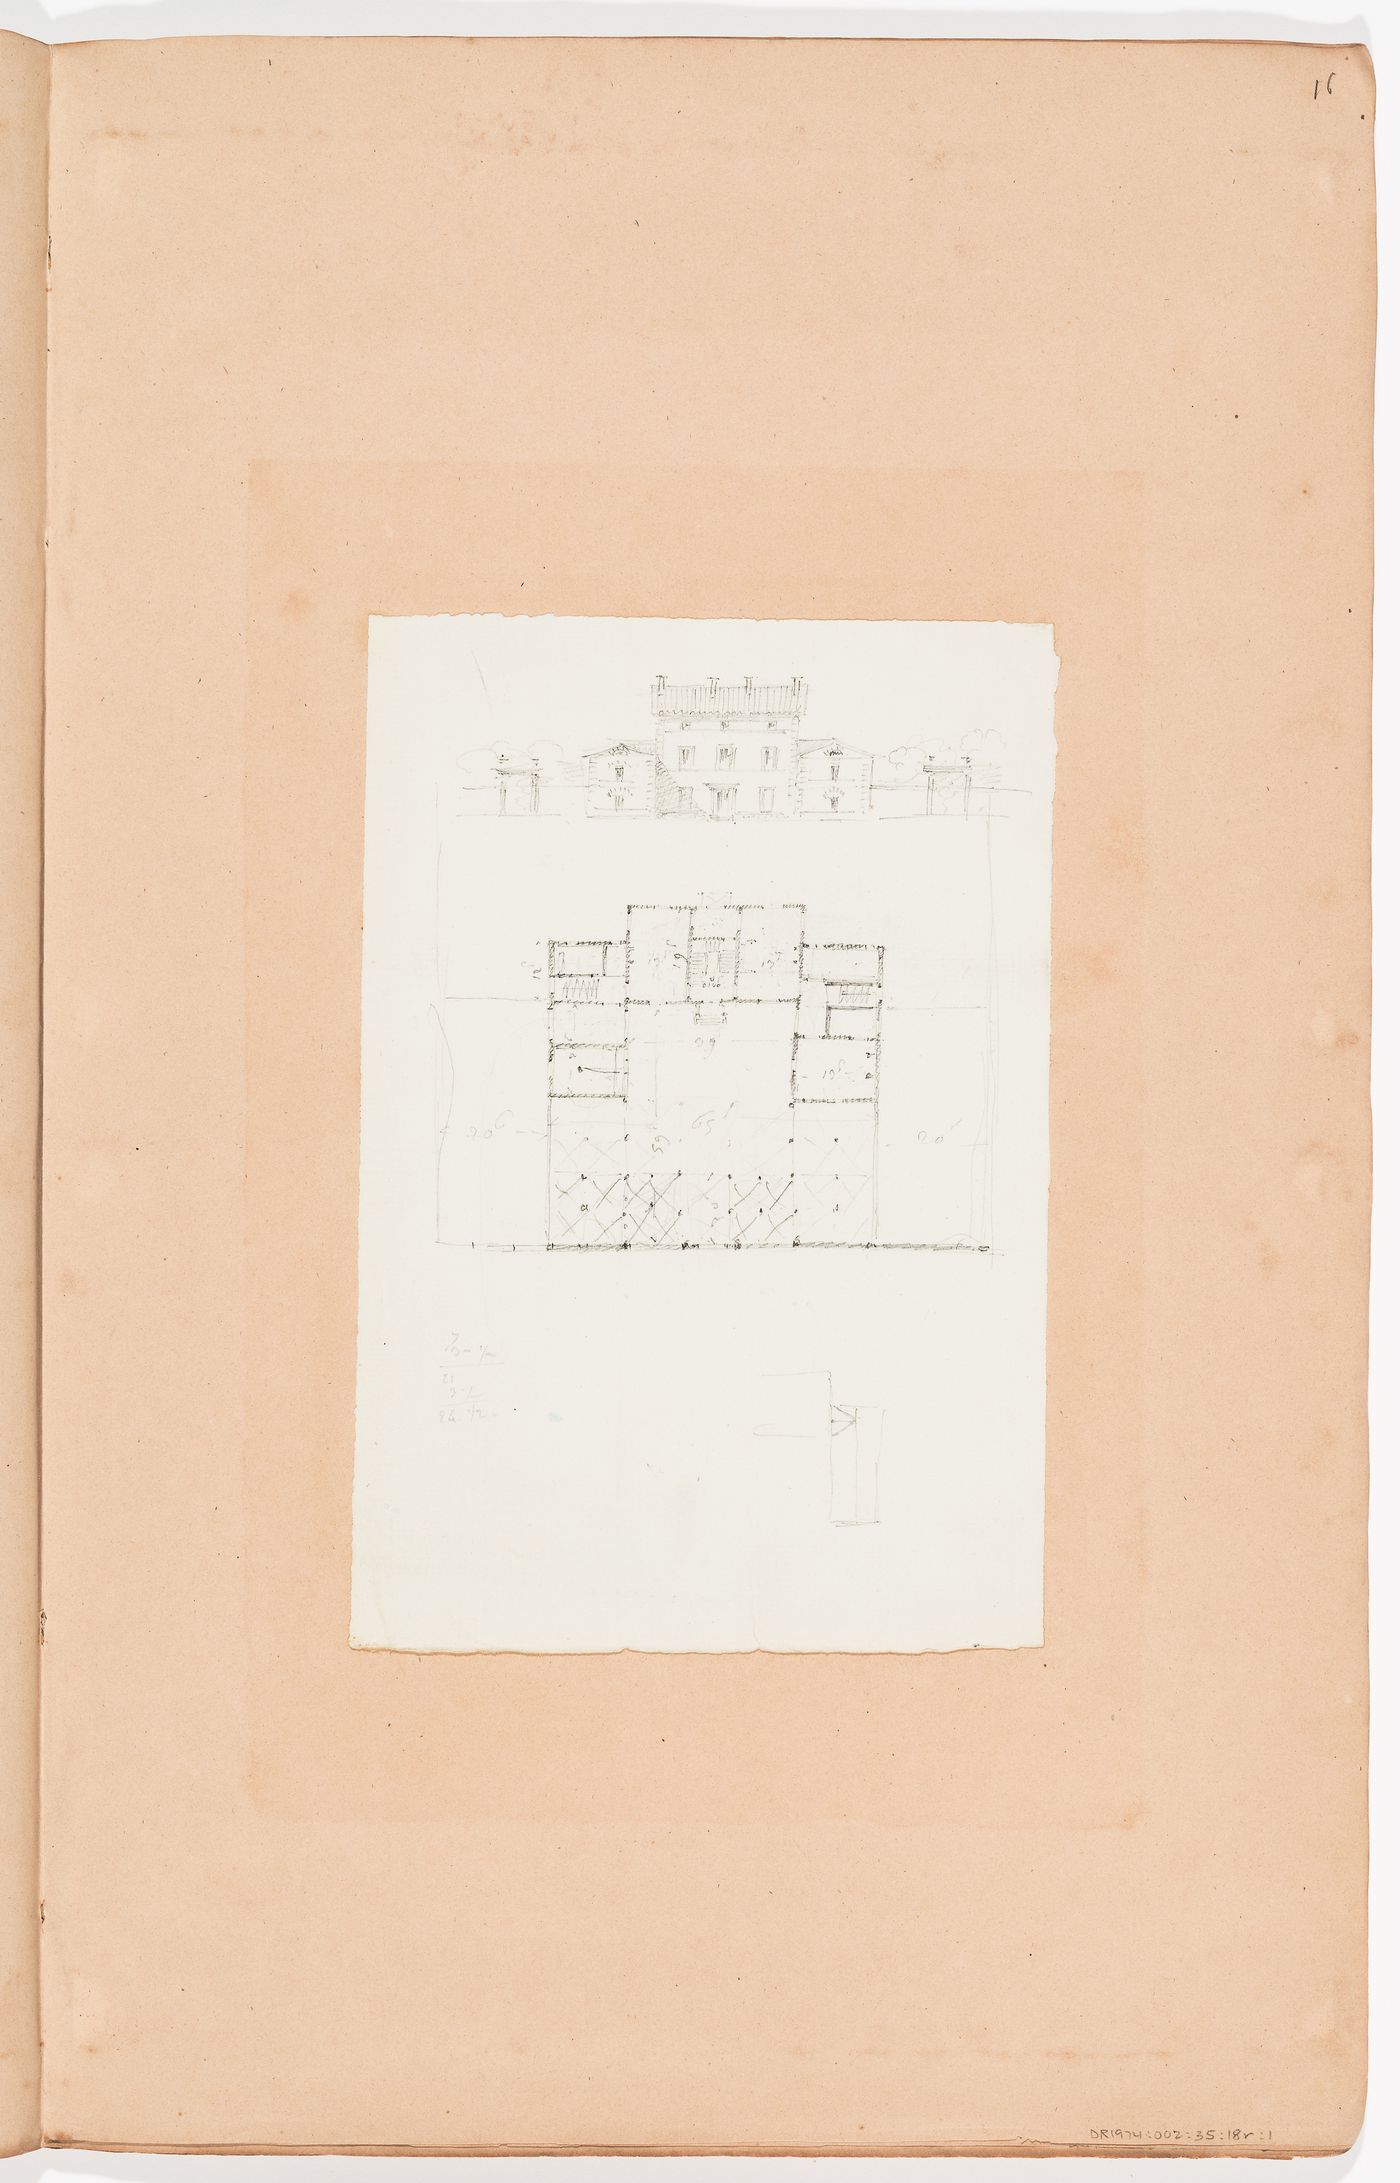 Sketch elevation and plan for a country house; verso: Sketch elevation and plans for country houses